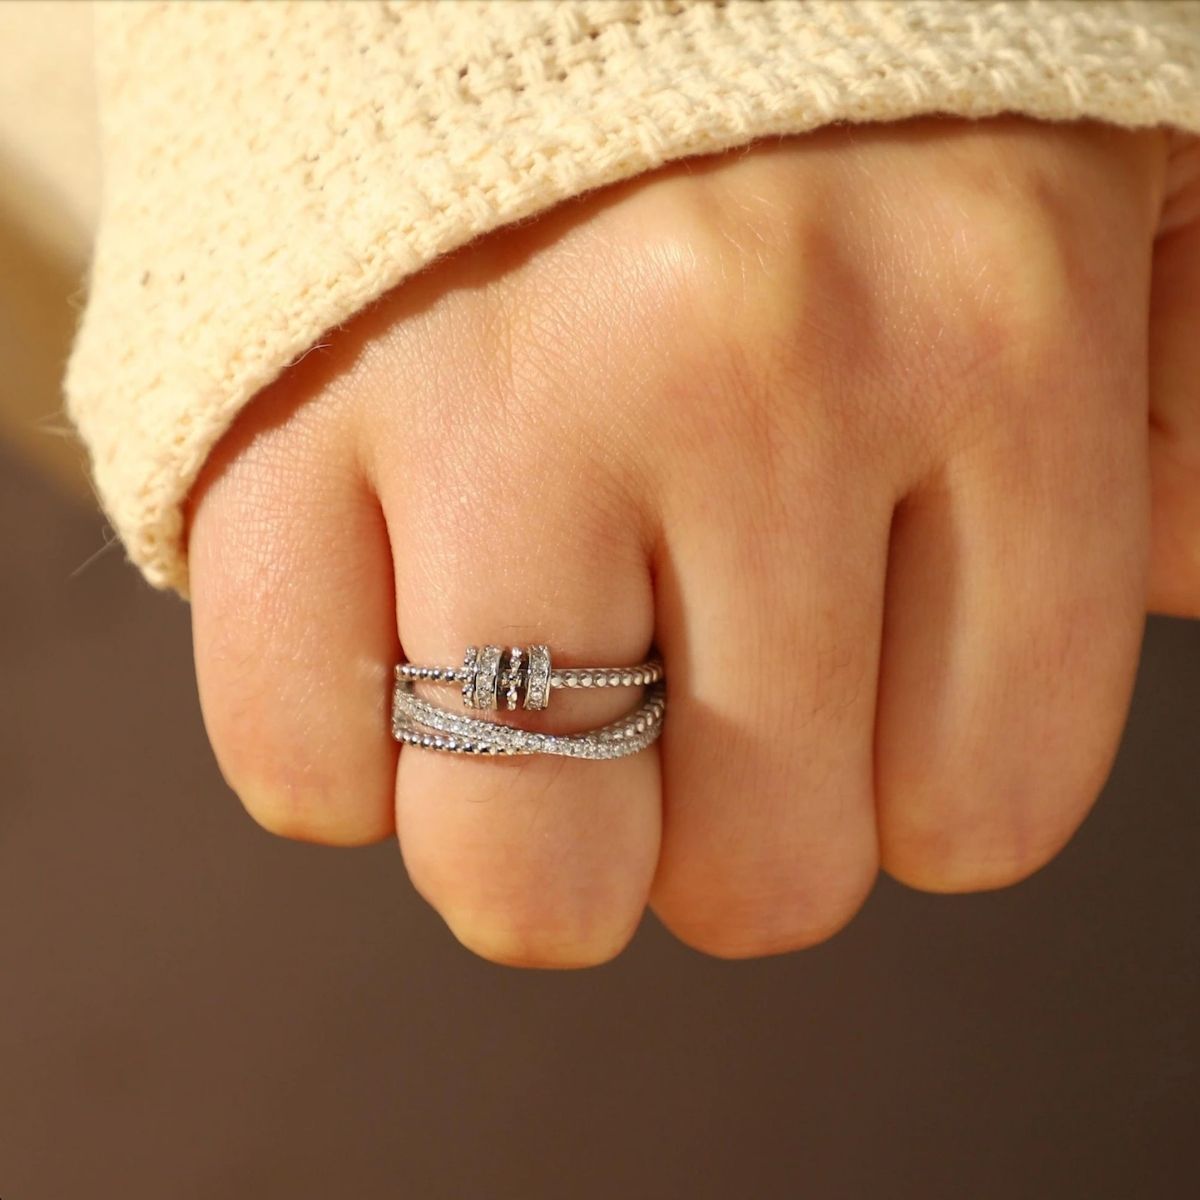 Ring™ "For my daughter"